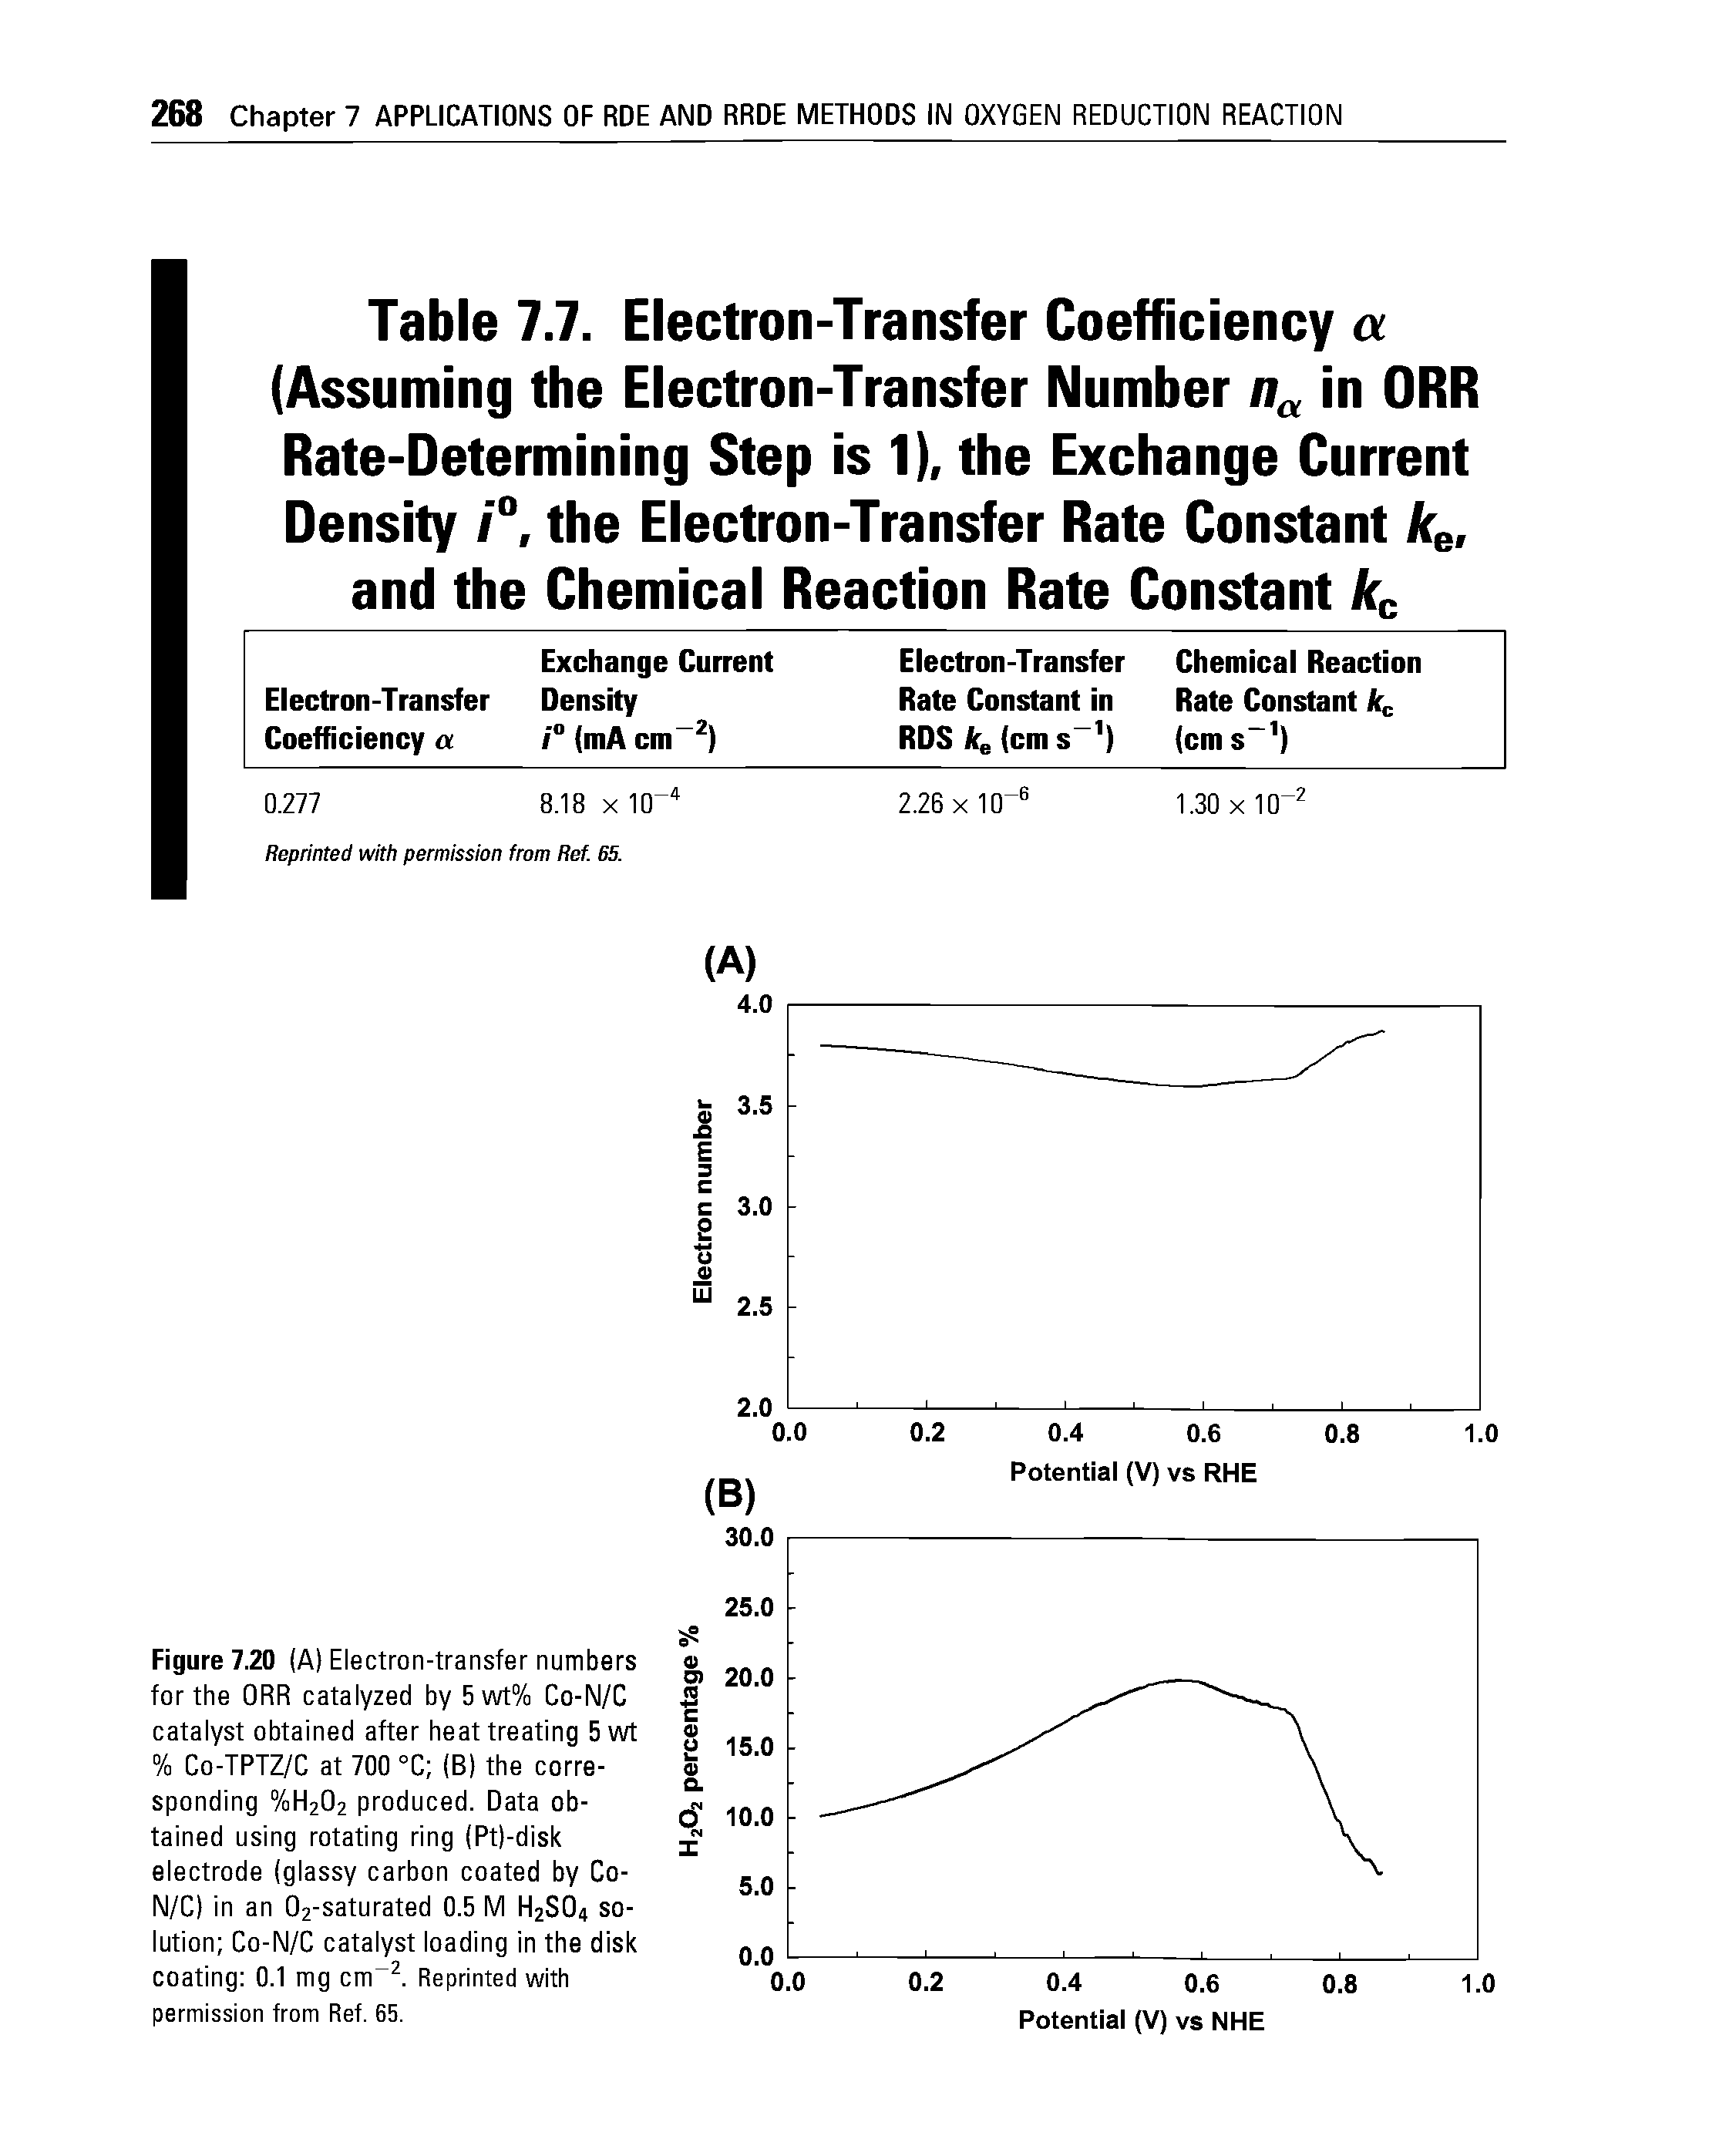 Figure 7.20 (A) Electron-transfer numbers for the ORR catalyzed by 5wt% Co-N/C catalyst obtained after heat treating 5wt % Co-TPTZ/C at 700 °C (B) the corresponding %H202 produced. Data obtained using rotating ring (Pt)-disk electrode (glassy carbon coated by Co-N/C) in an 02-saturated 0.5 M H2SO4 solution Co-N/C catalyst loading in the disk coating 0.1 mg cm. Reprinted with permission from Ref. 65.